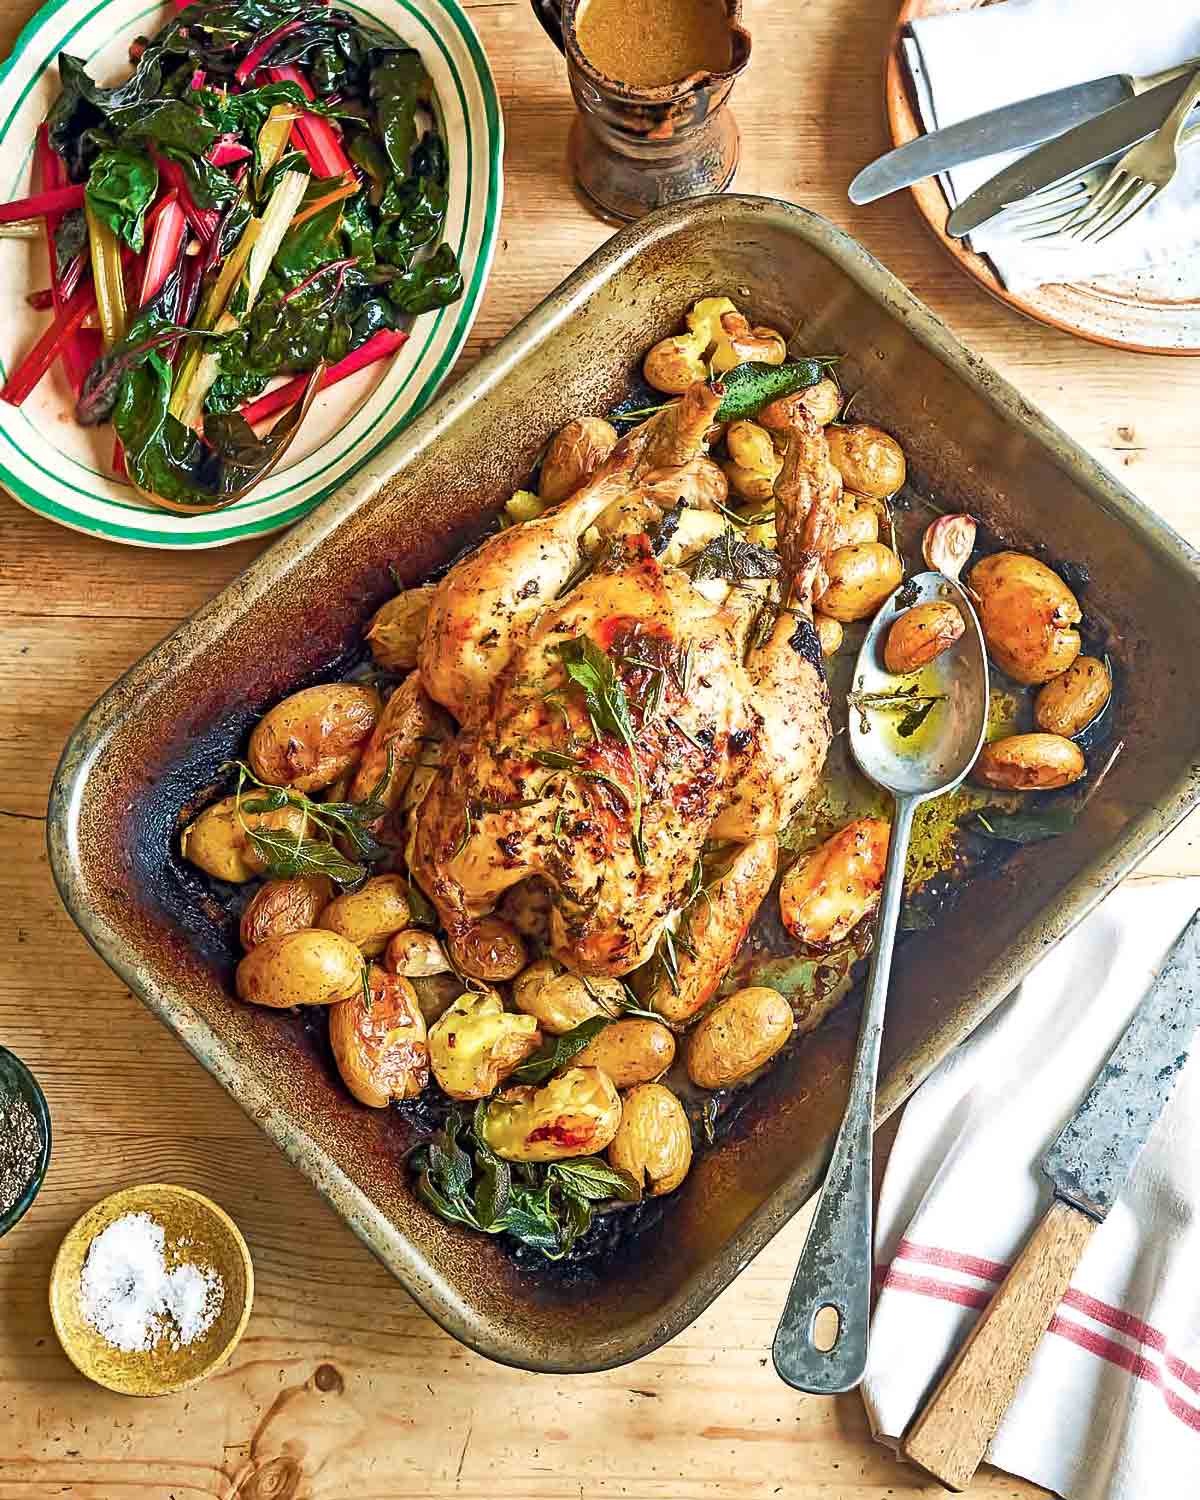 Lemon herb roast chicken with fingerling potatoes and cloves of garlic, in a roasting pan, beside a plate of Swiss chard salad.